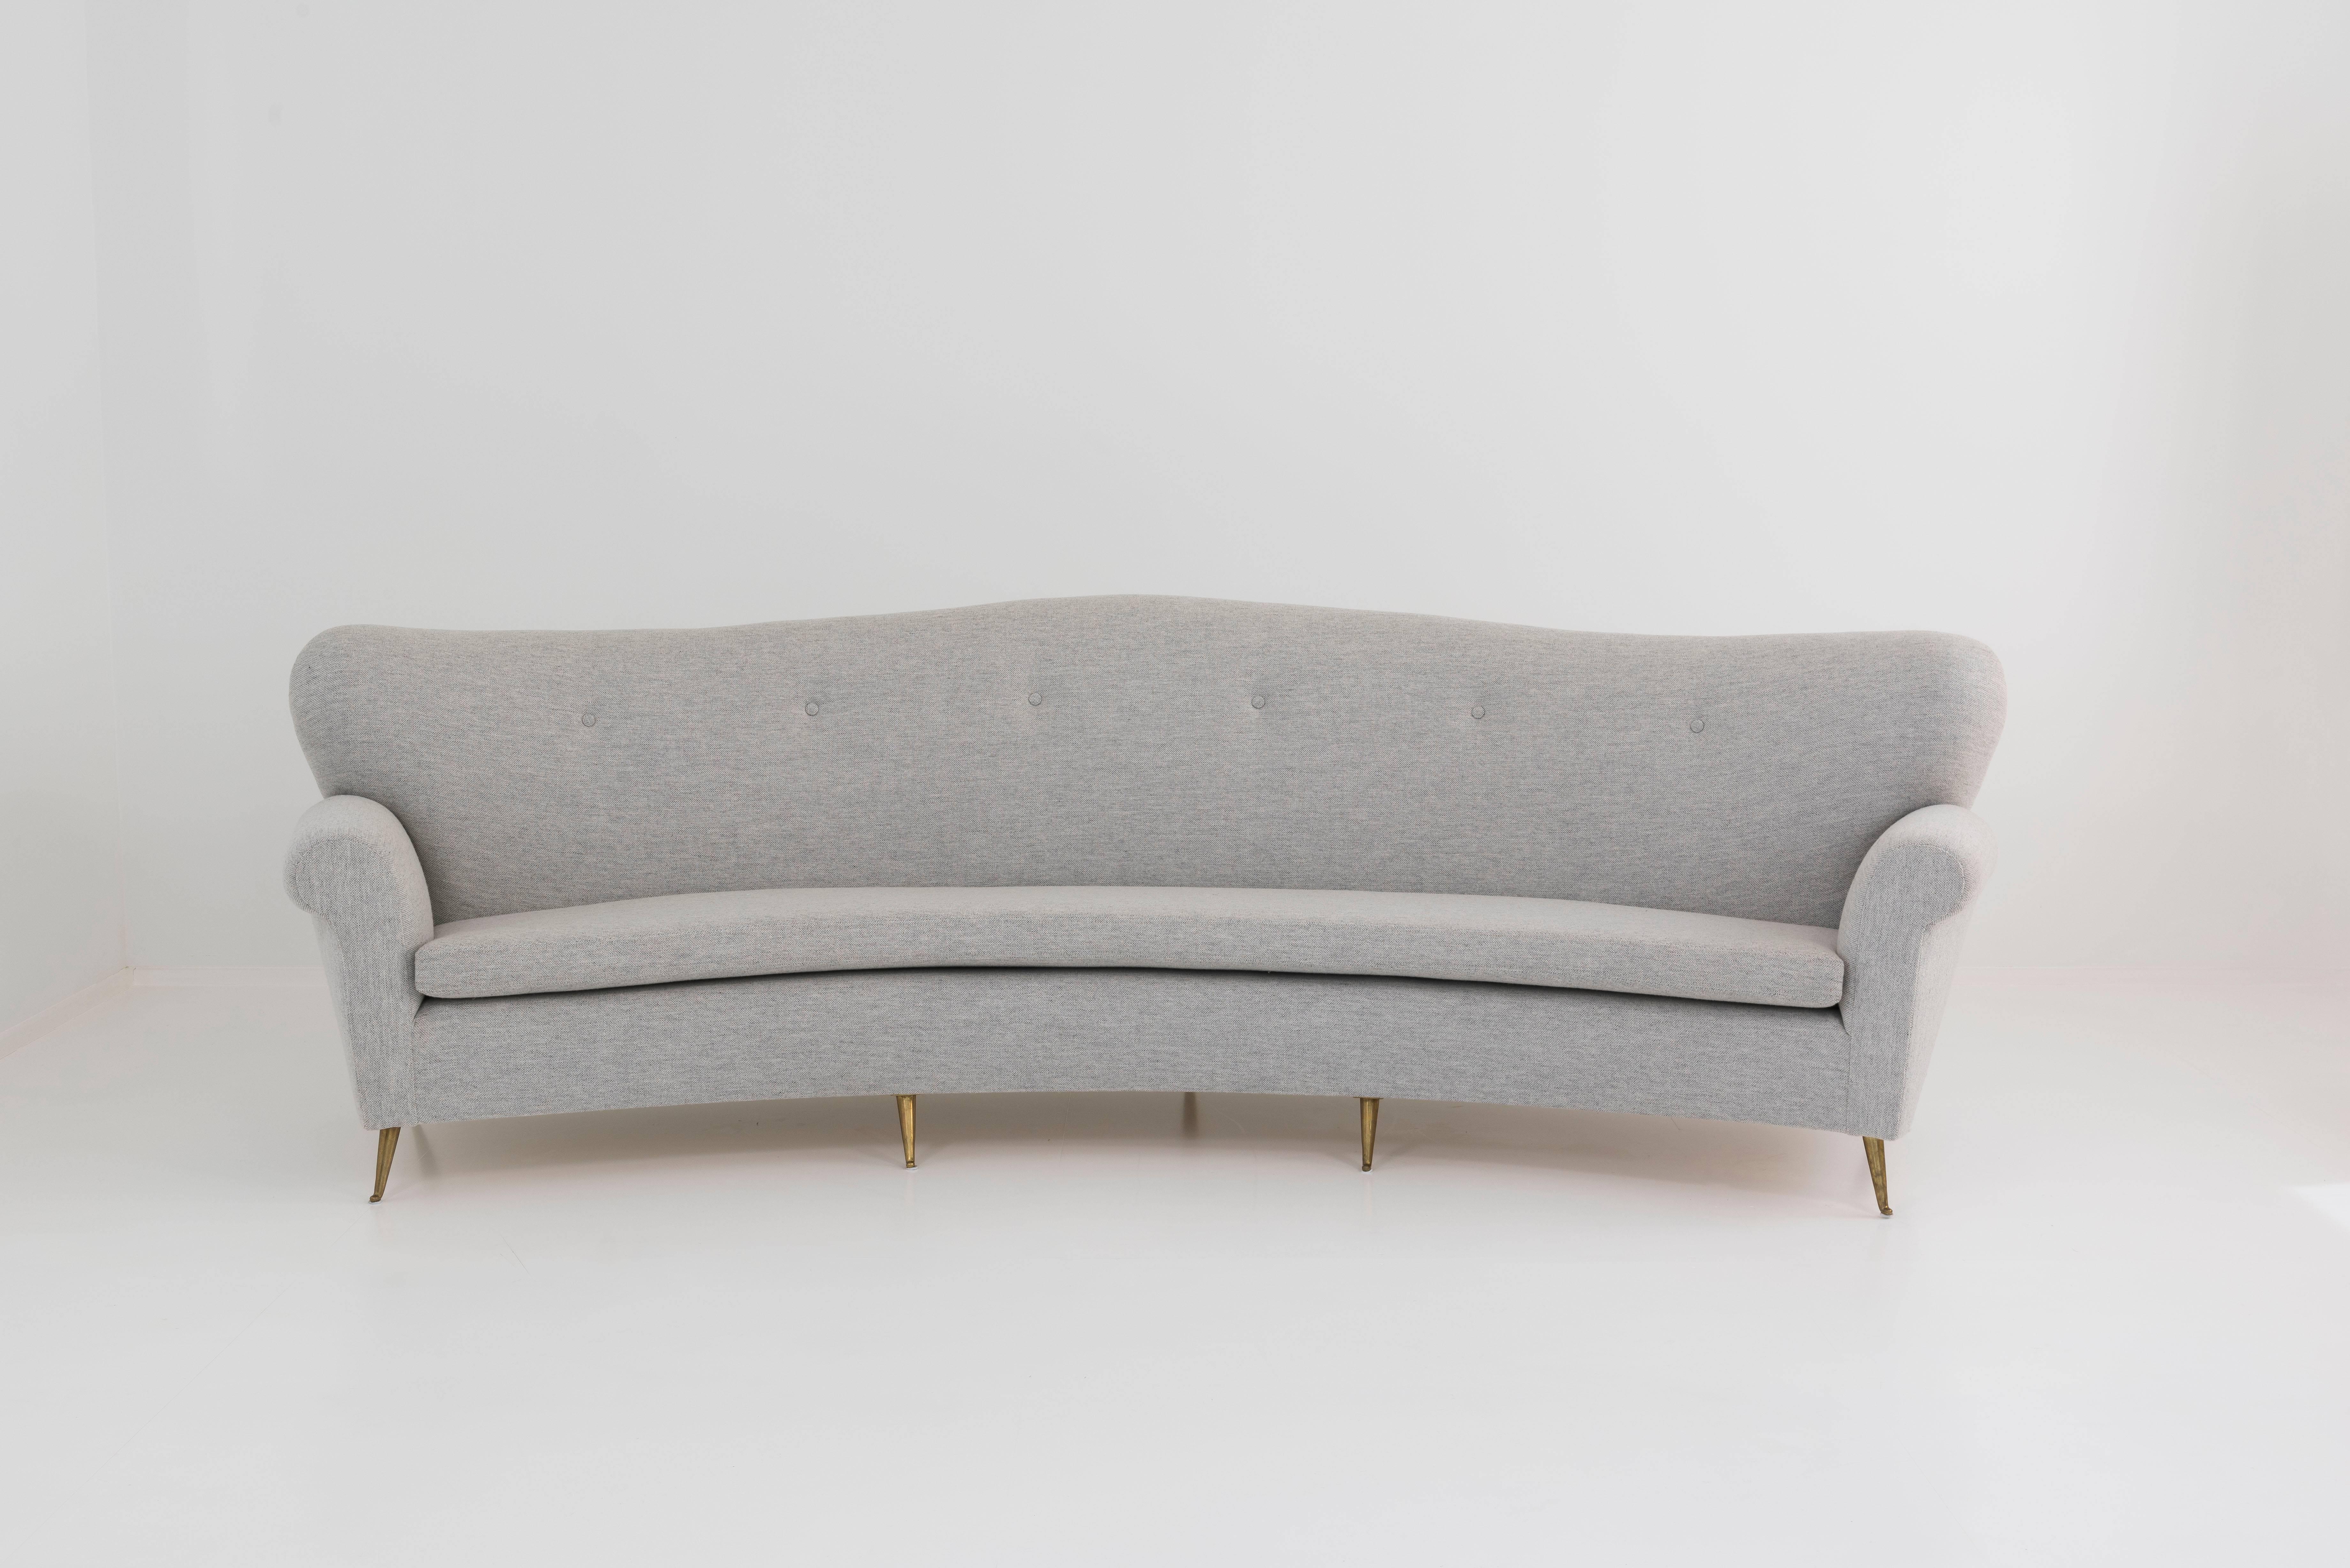 Big curved sofa with brass feet, good round form, clear gray upholstery fabric, unknown designer, Italy, circa 1950 

Measures: H 90 cm long 3 m prof 90 cm 
H 35.43